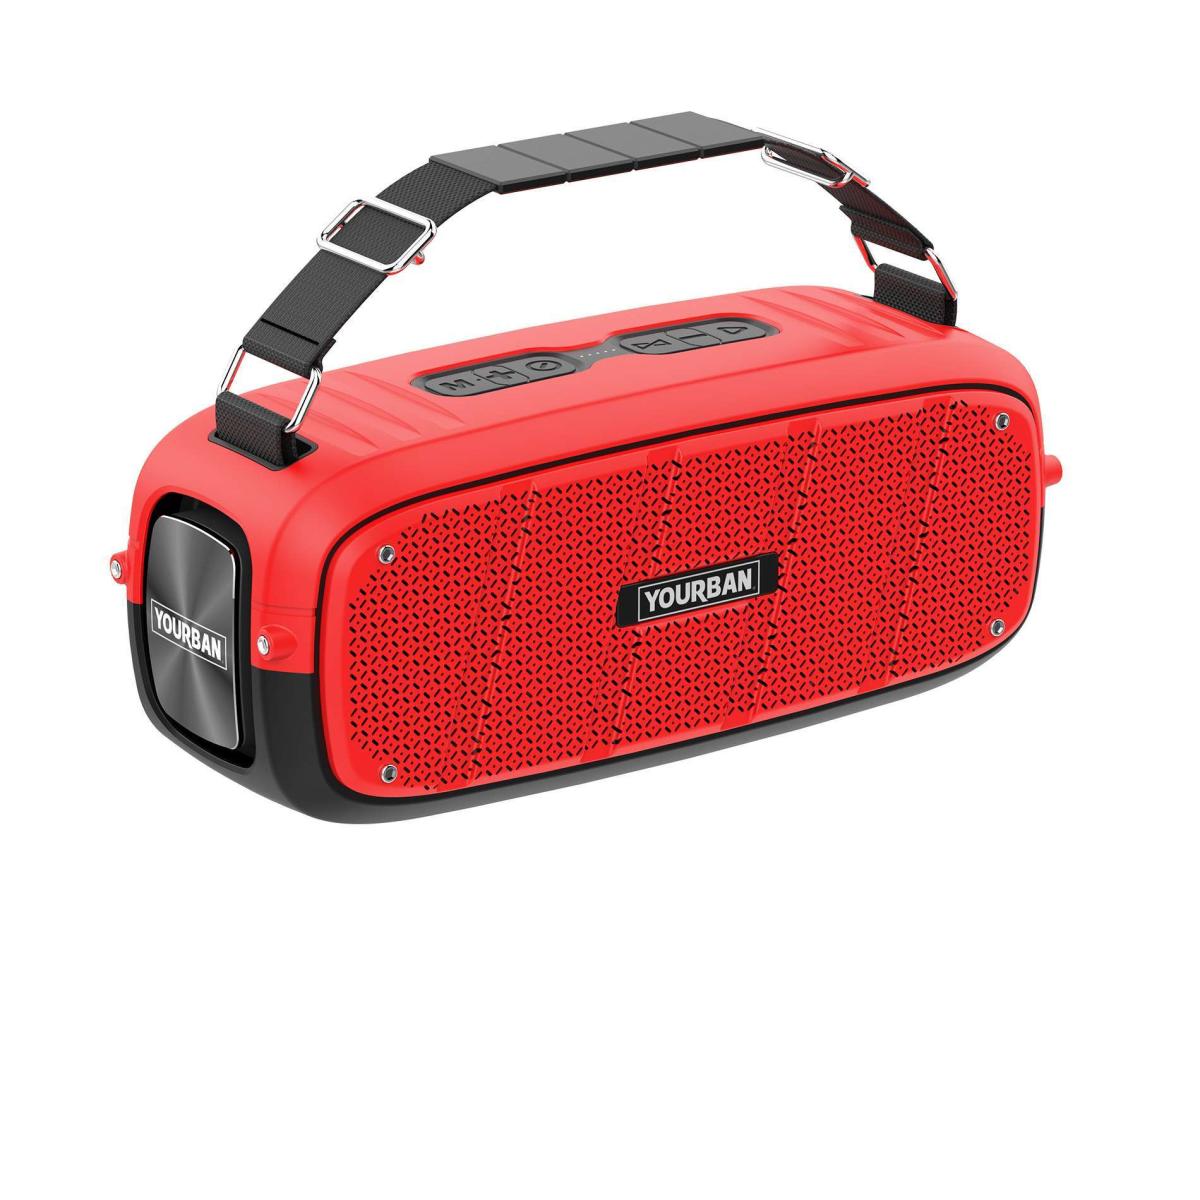 Enceinte nomade bluetooth compacte rouge - yourban